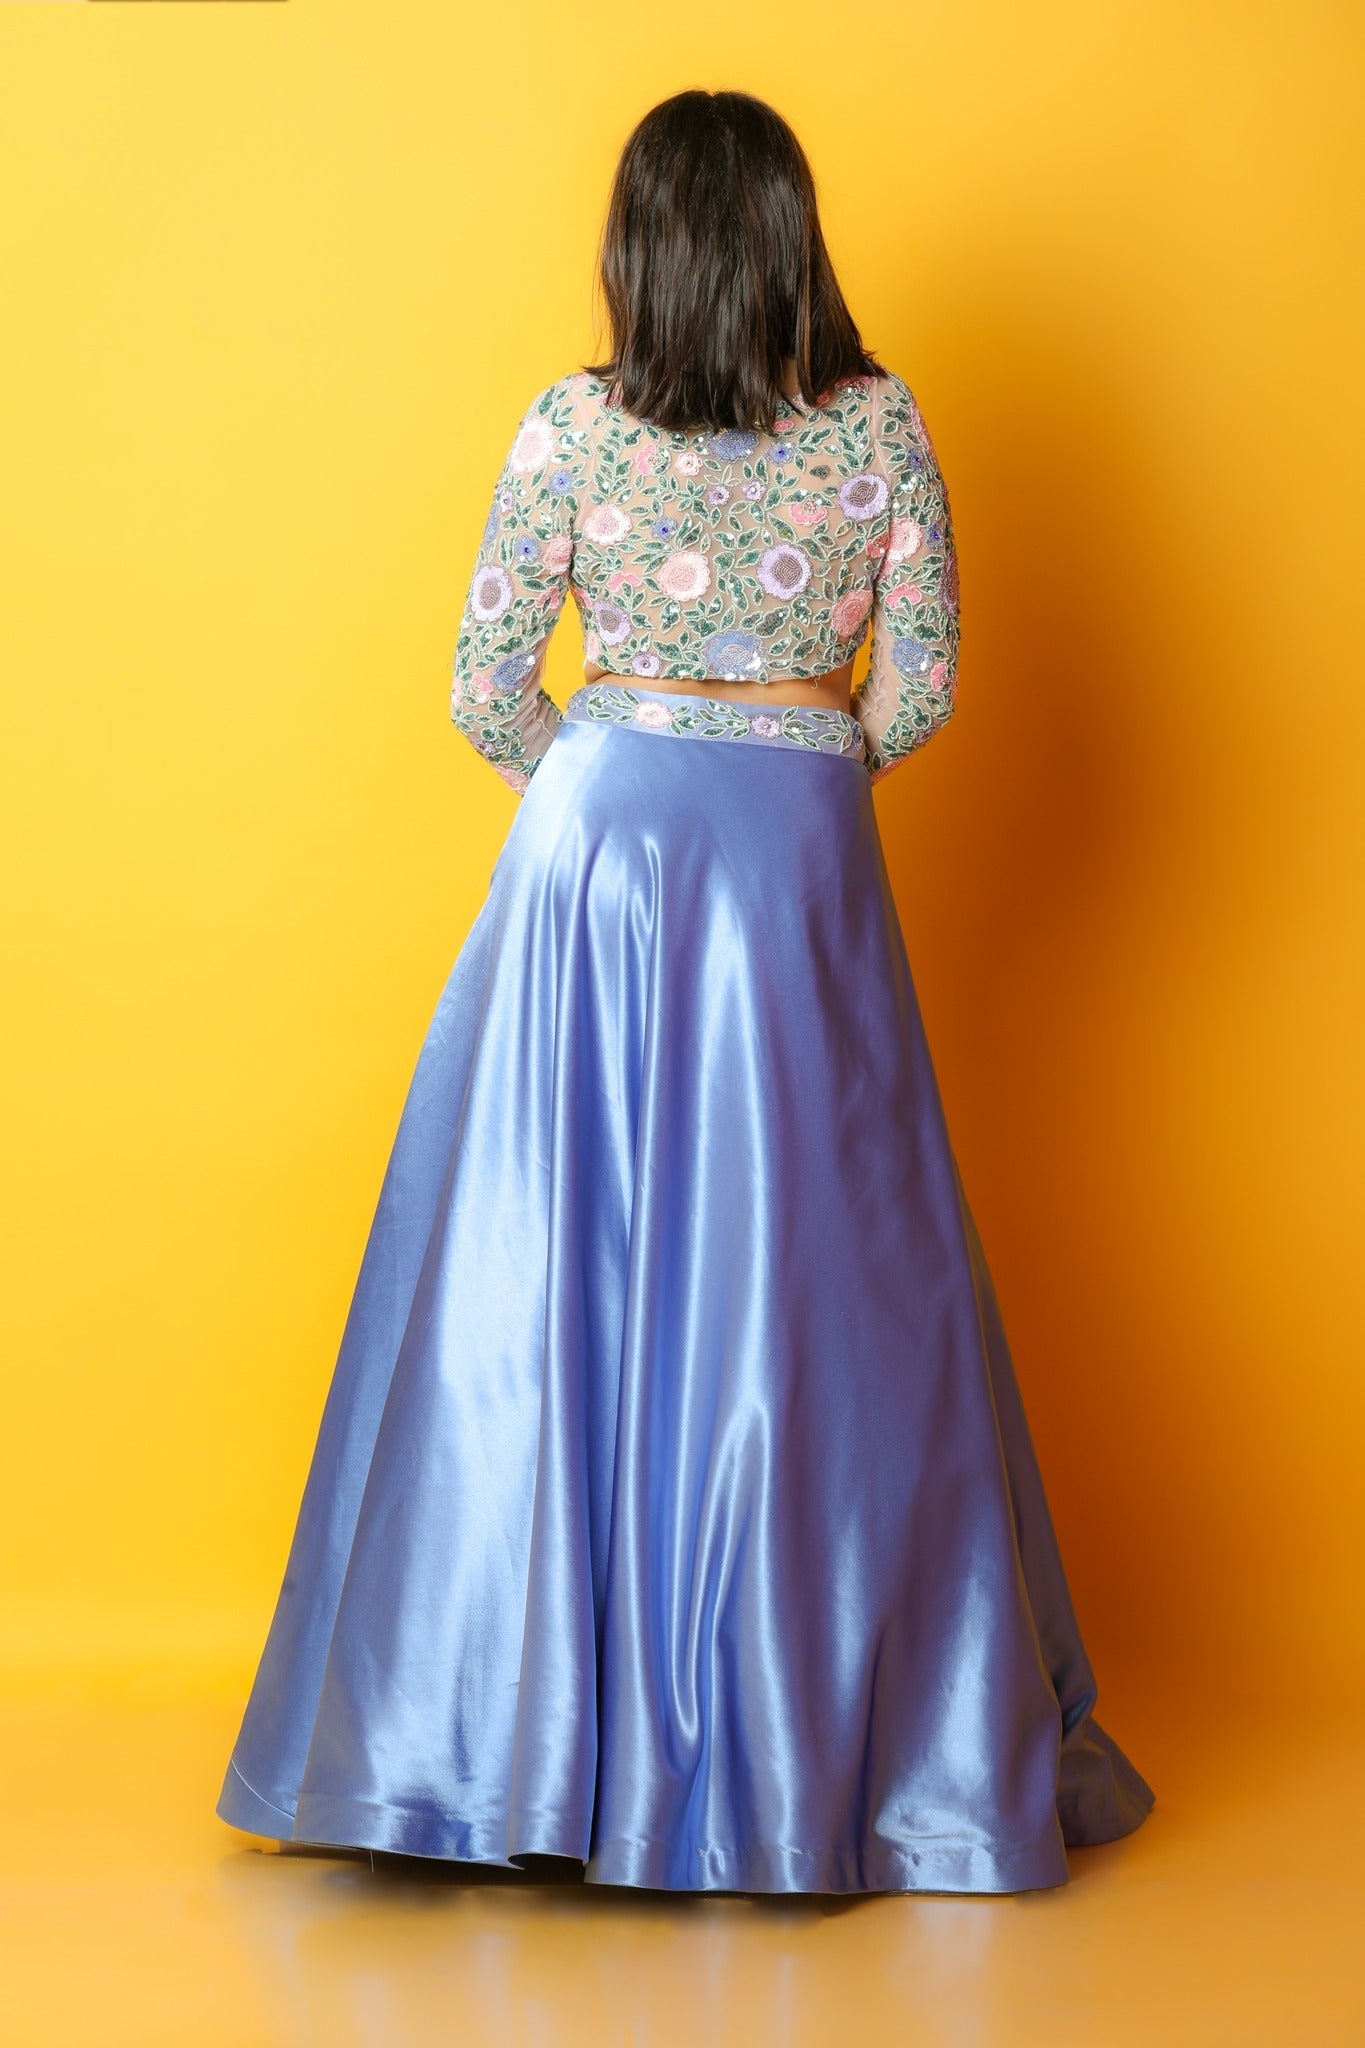 Blue Satin Lehenga And Blouse With Heavily Embroidered Colourful Spring Blooms